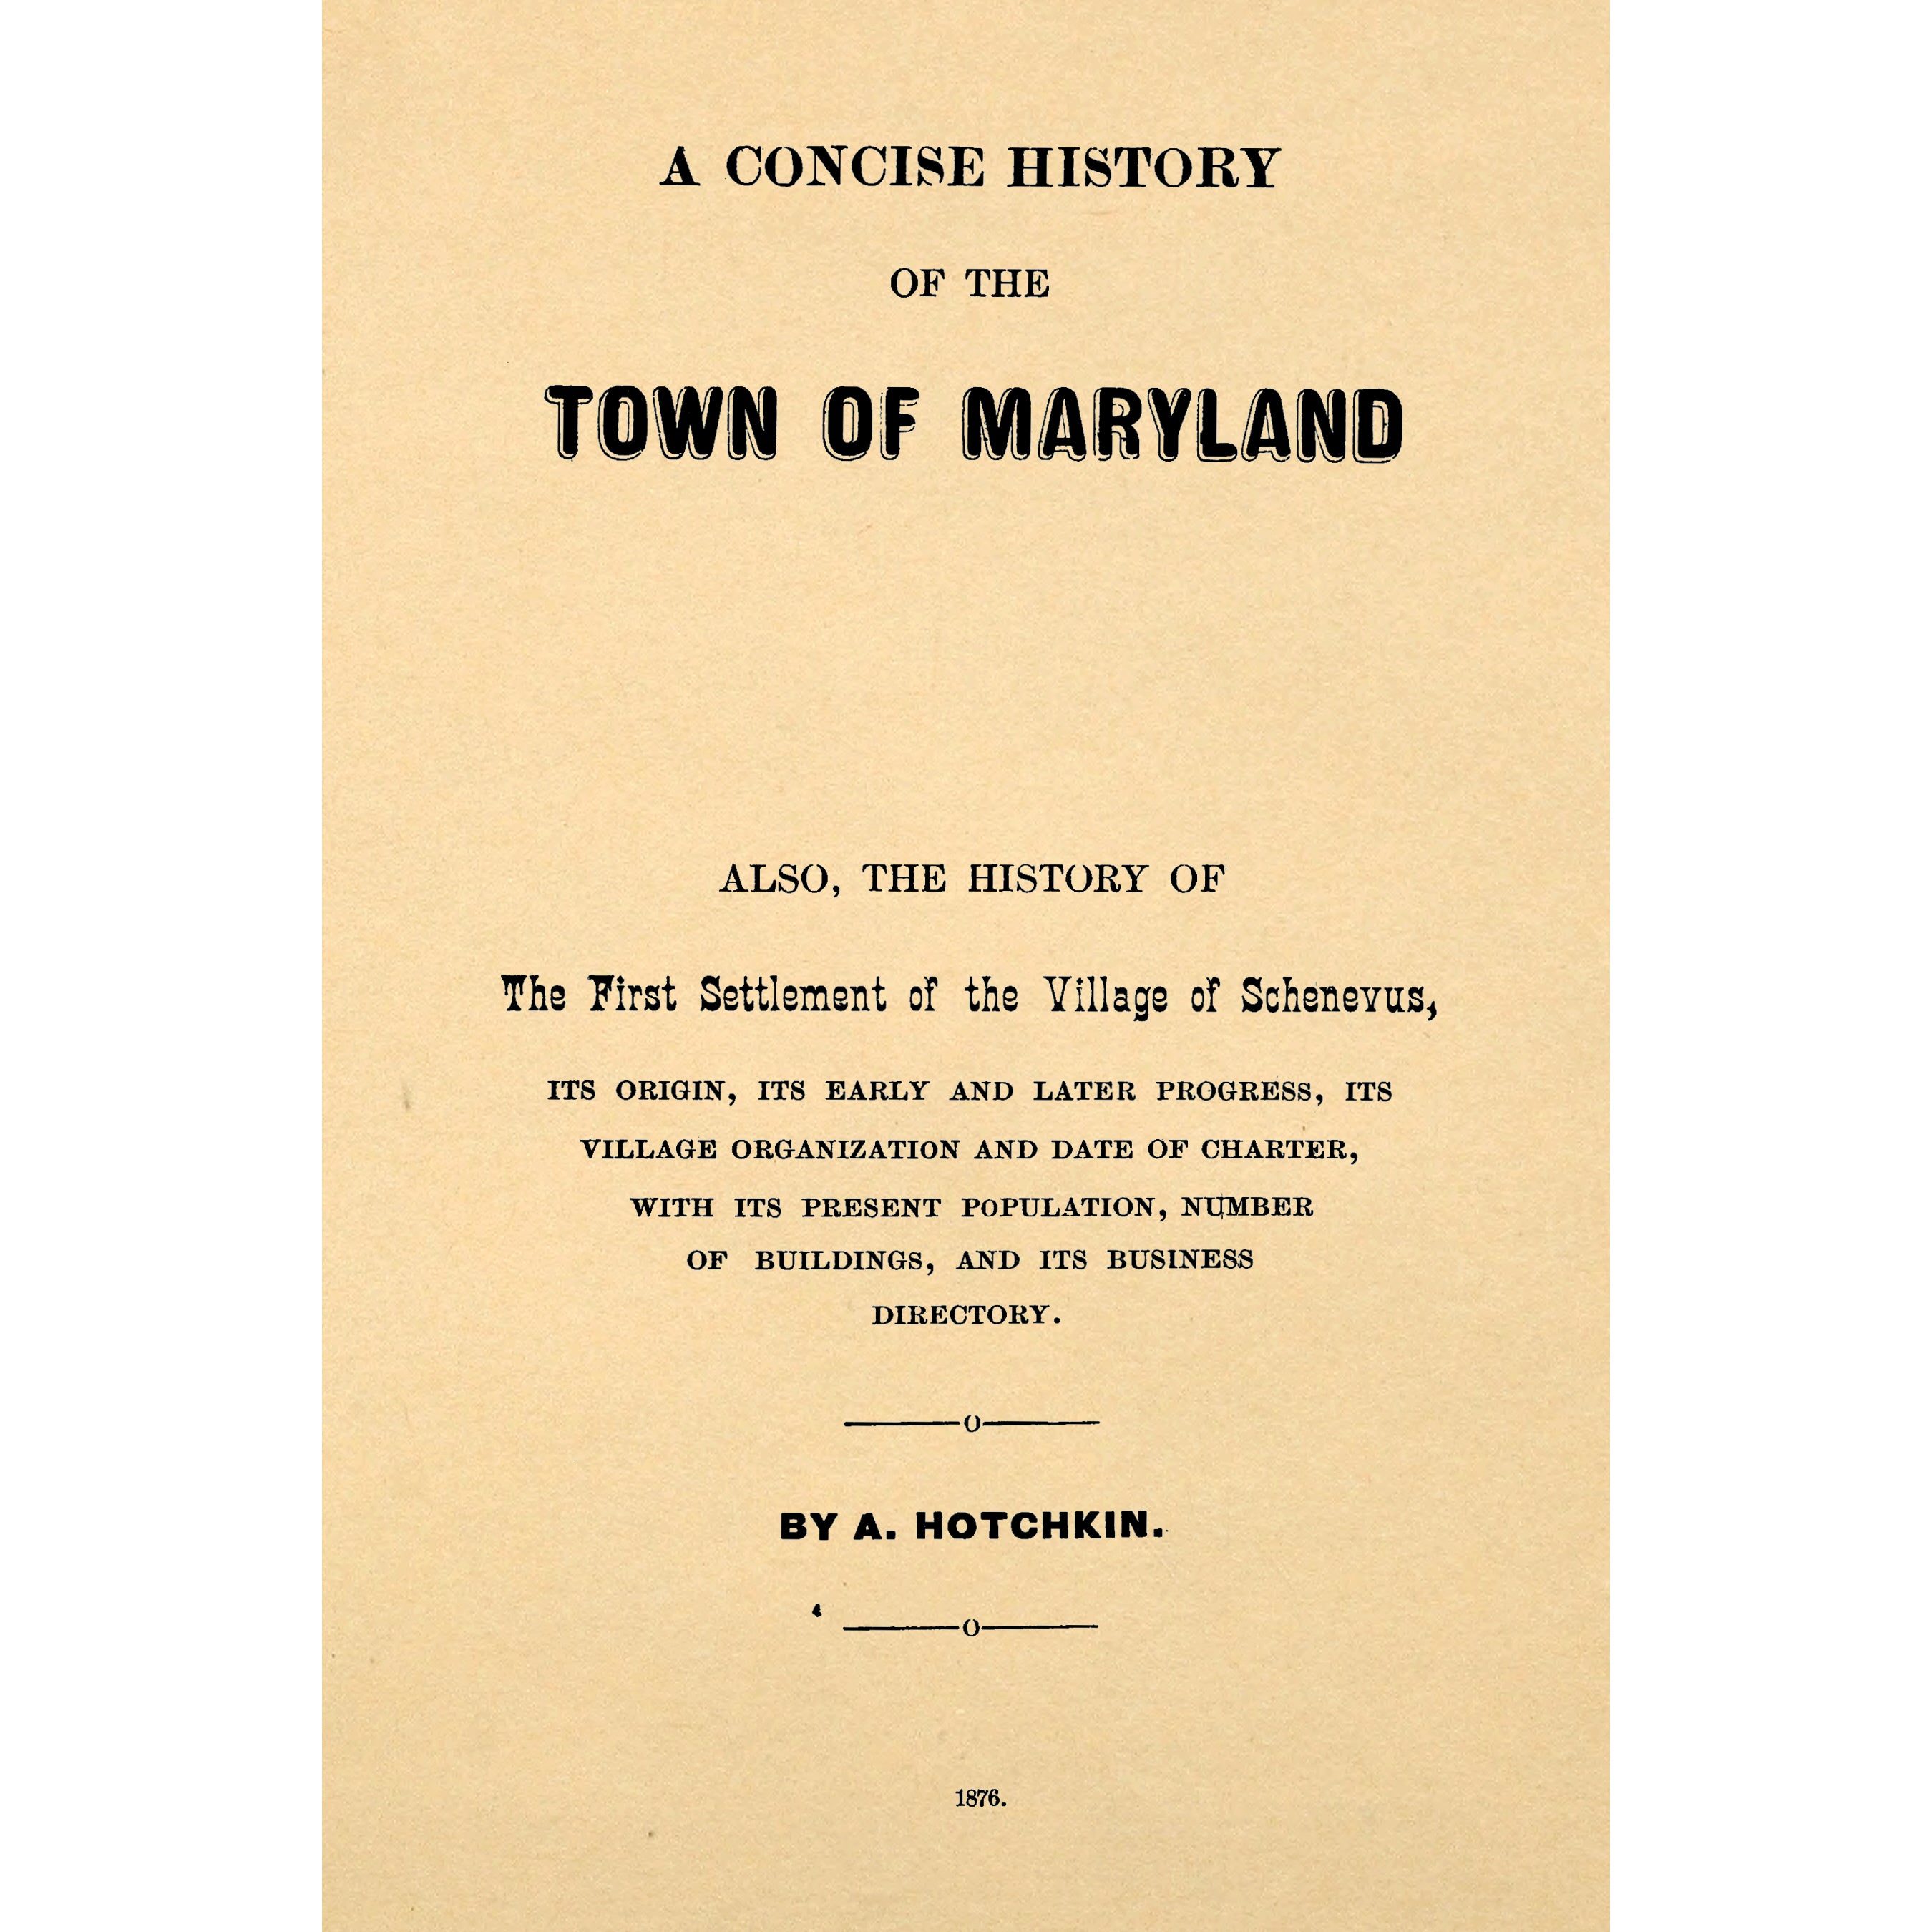 A concise history of the town of Maryland [New York] from its first settlement.